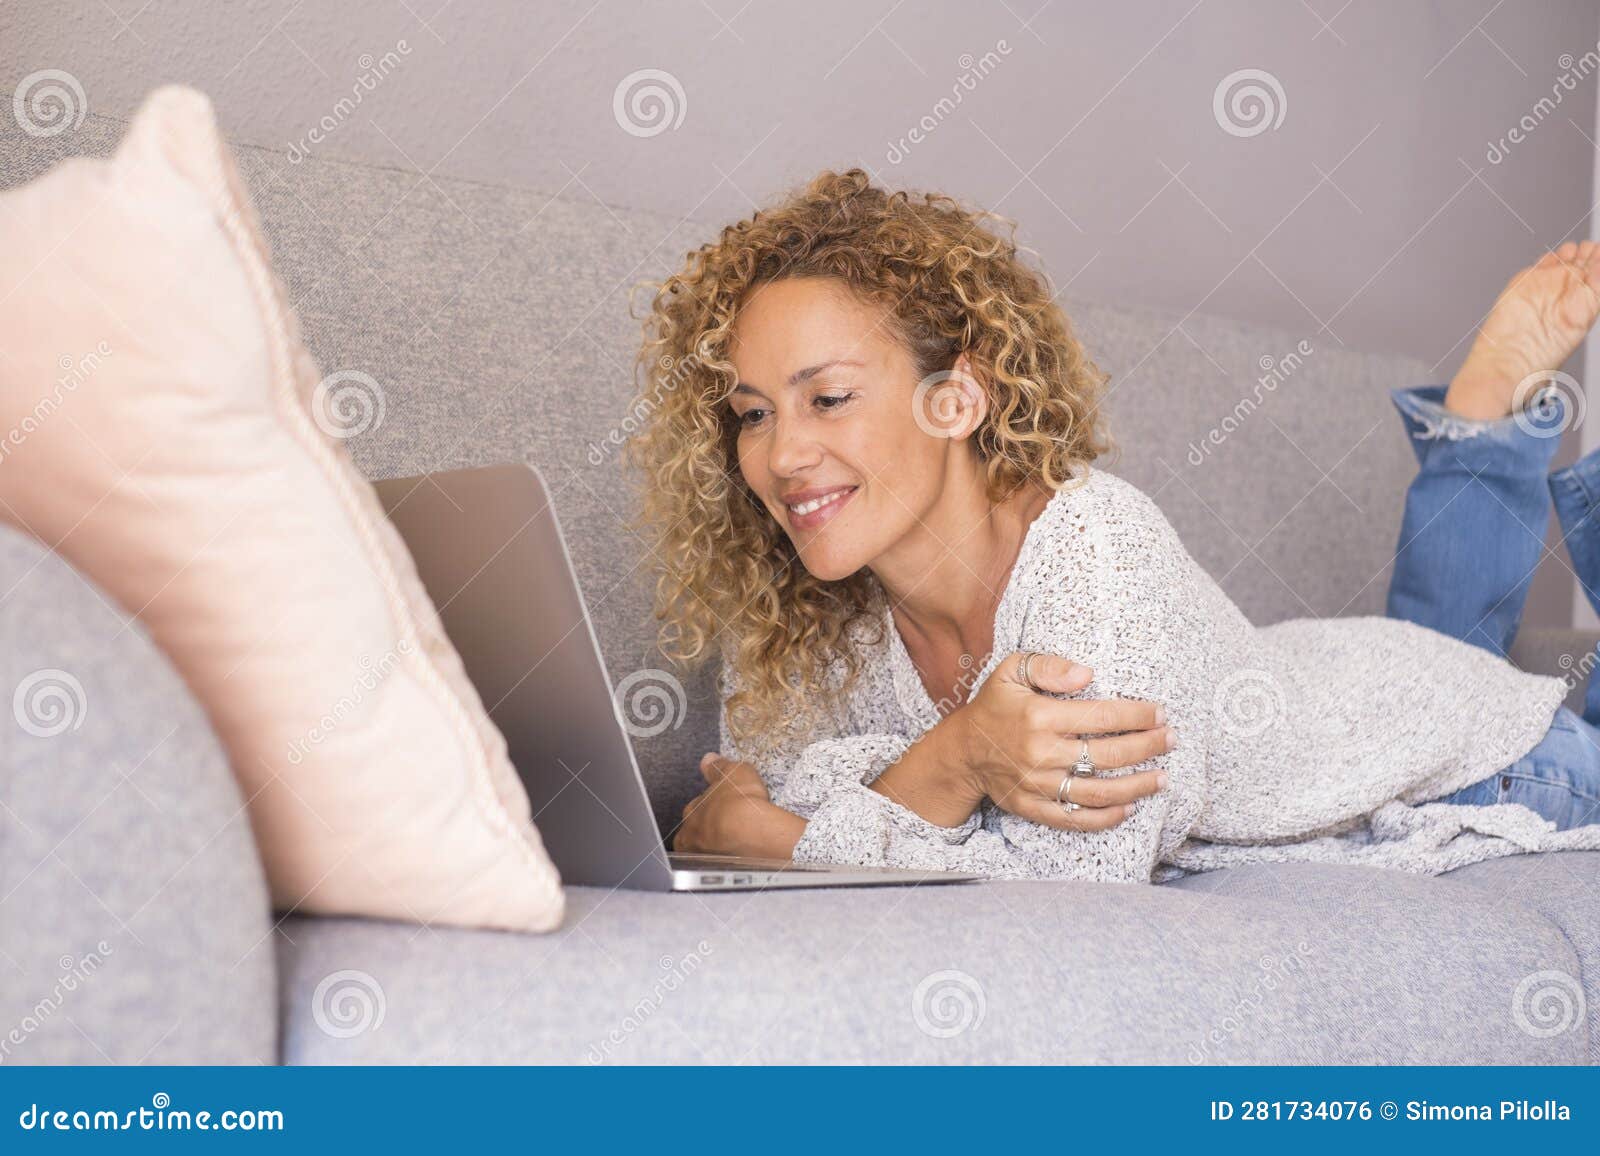 portrait of happy young adult womn using computer laying down on the couch at home in indoor relaxation leisure acitivy alone.